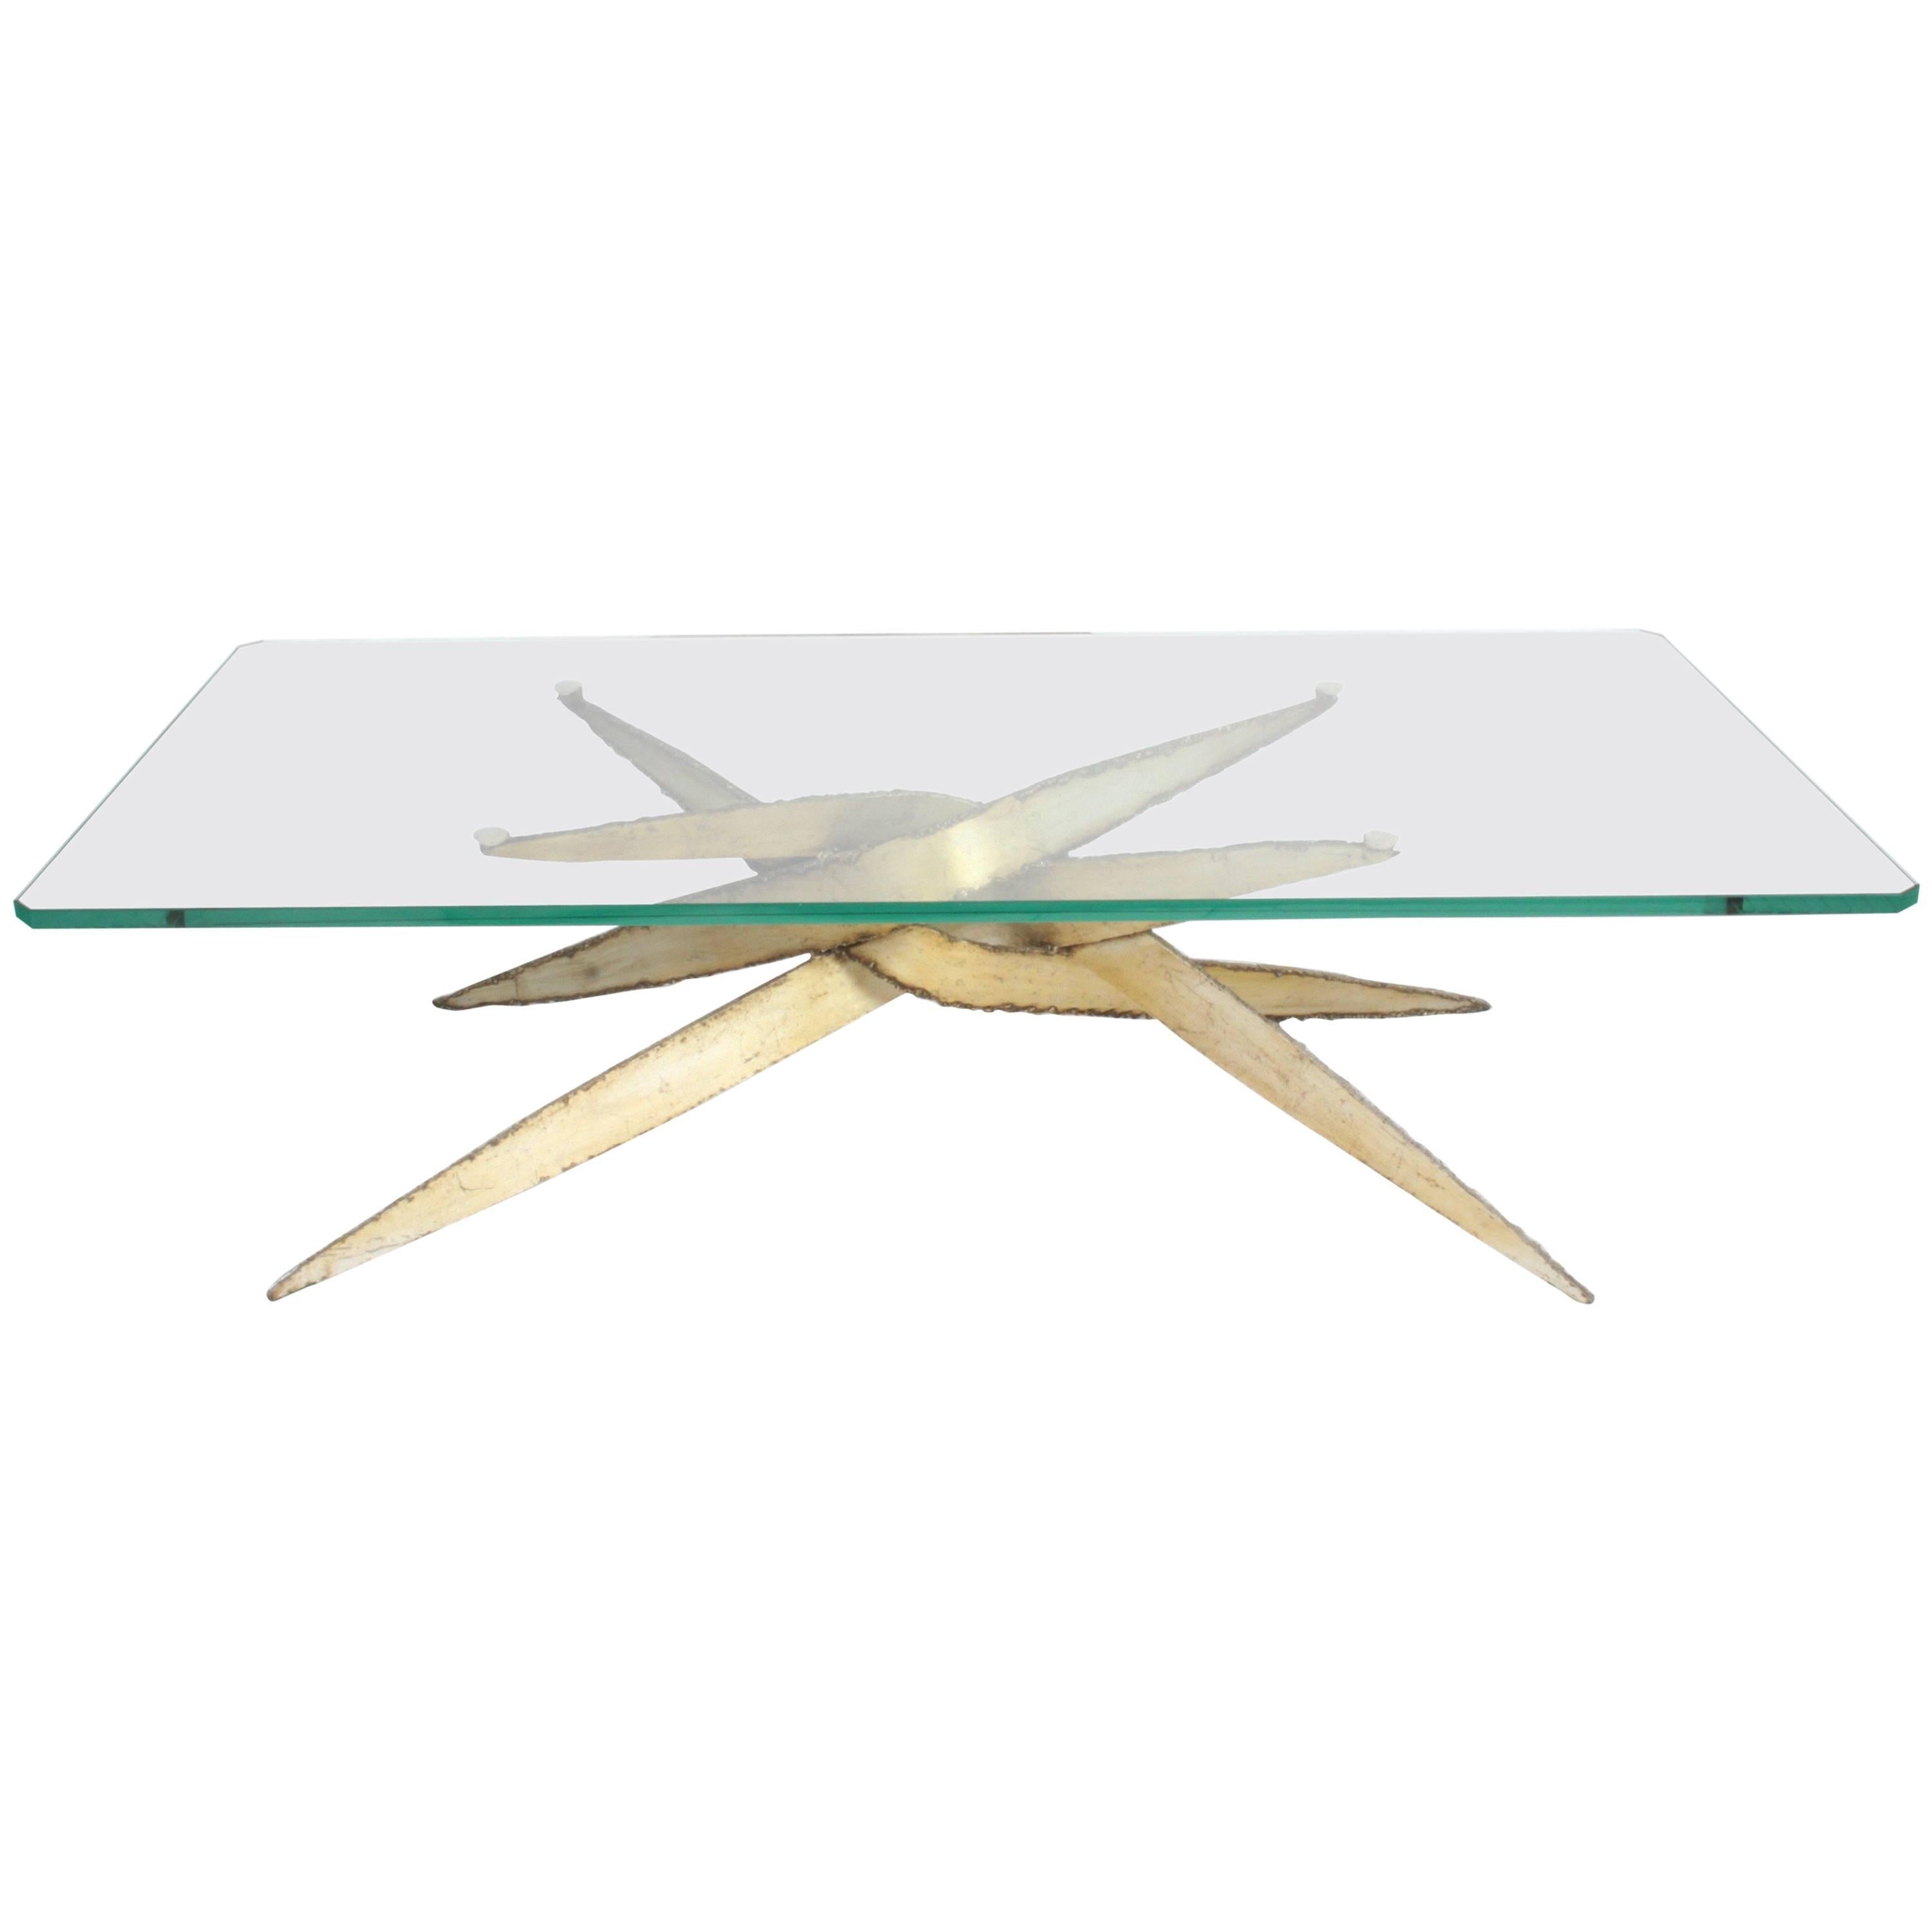 Sculptural Brutalist Torch Cut Glass Top Coffee Table, 1970s